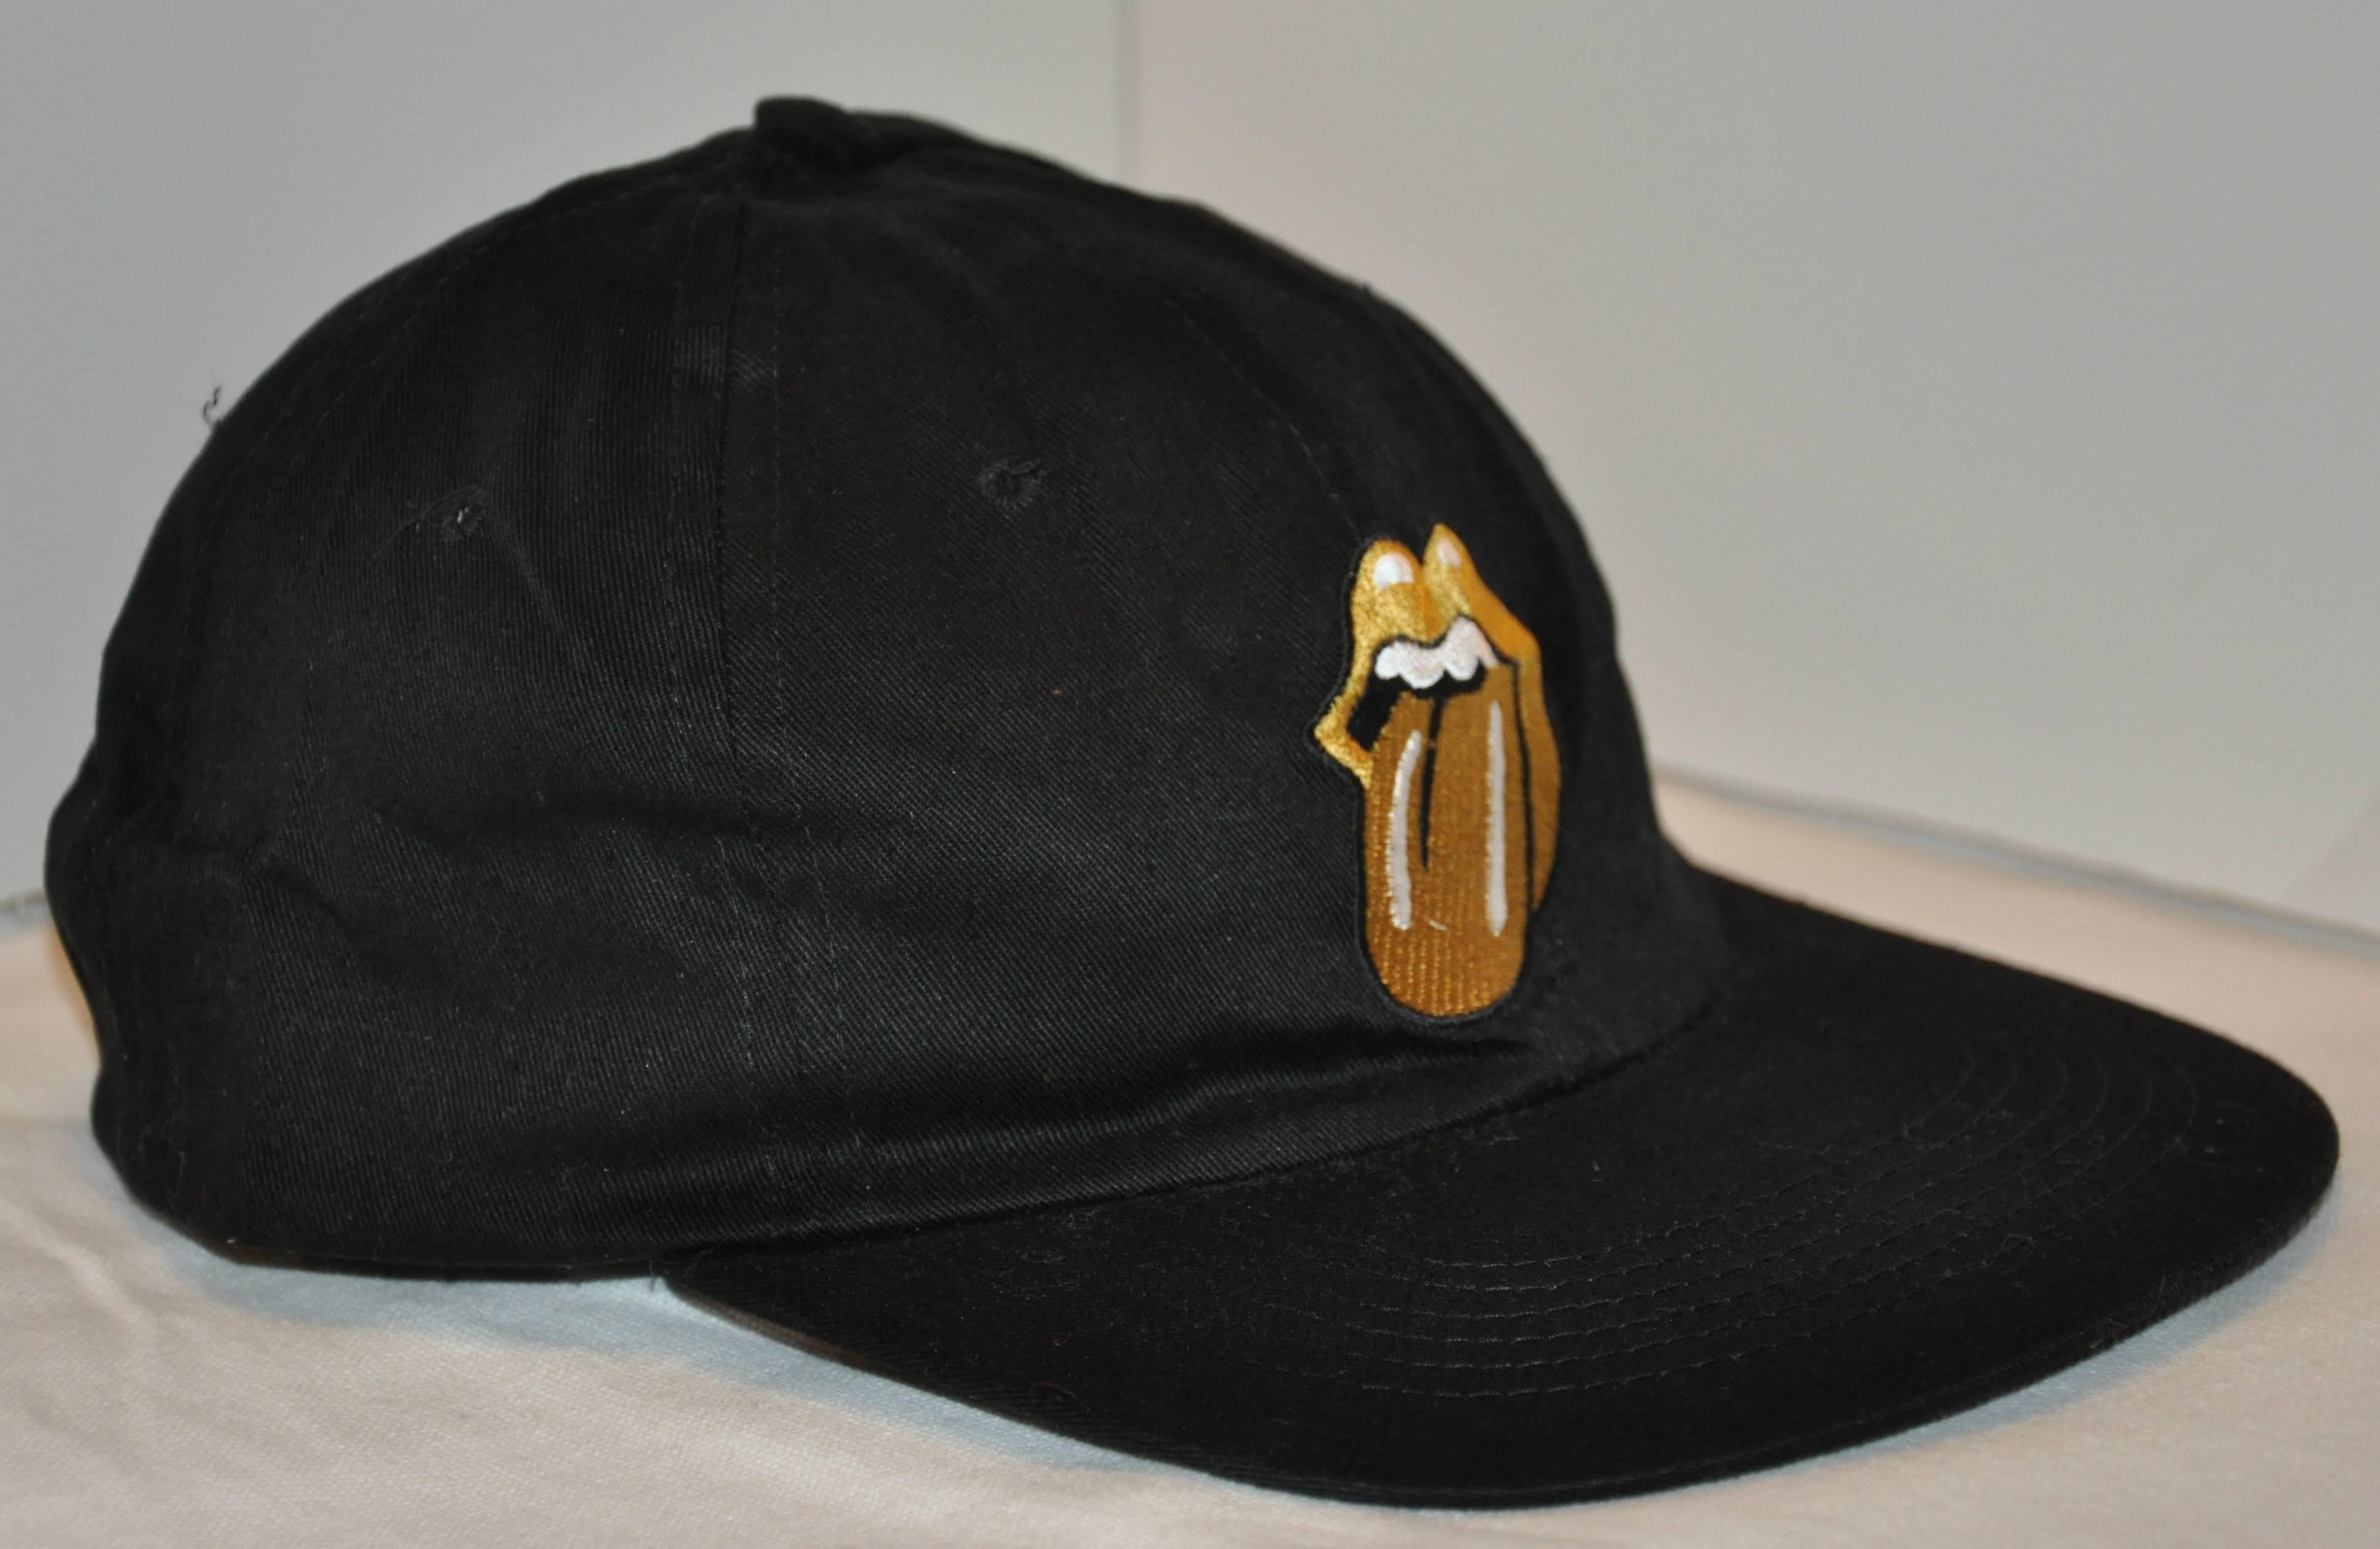        The Rolling Stones  1997 World-Wide "Road To Babylon Concert Tour black cotton cap has their signature "Sticky Tongue" in front. The center back has their "Road To Babylon" embroidered, with adjustable straps as well.